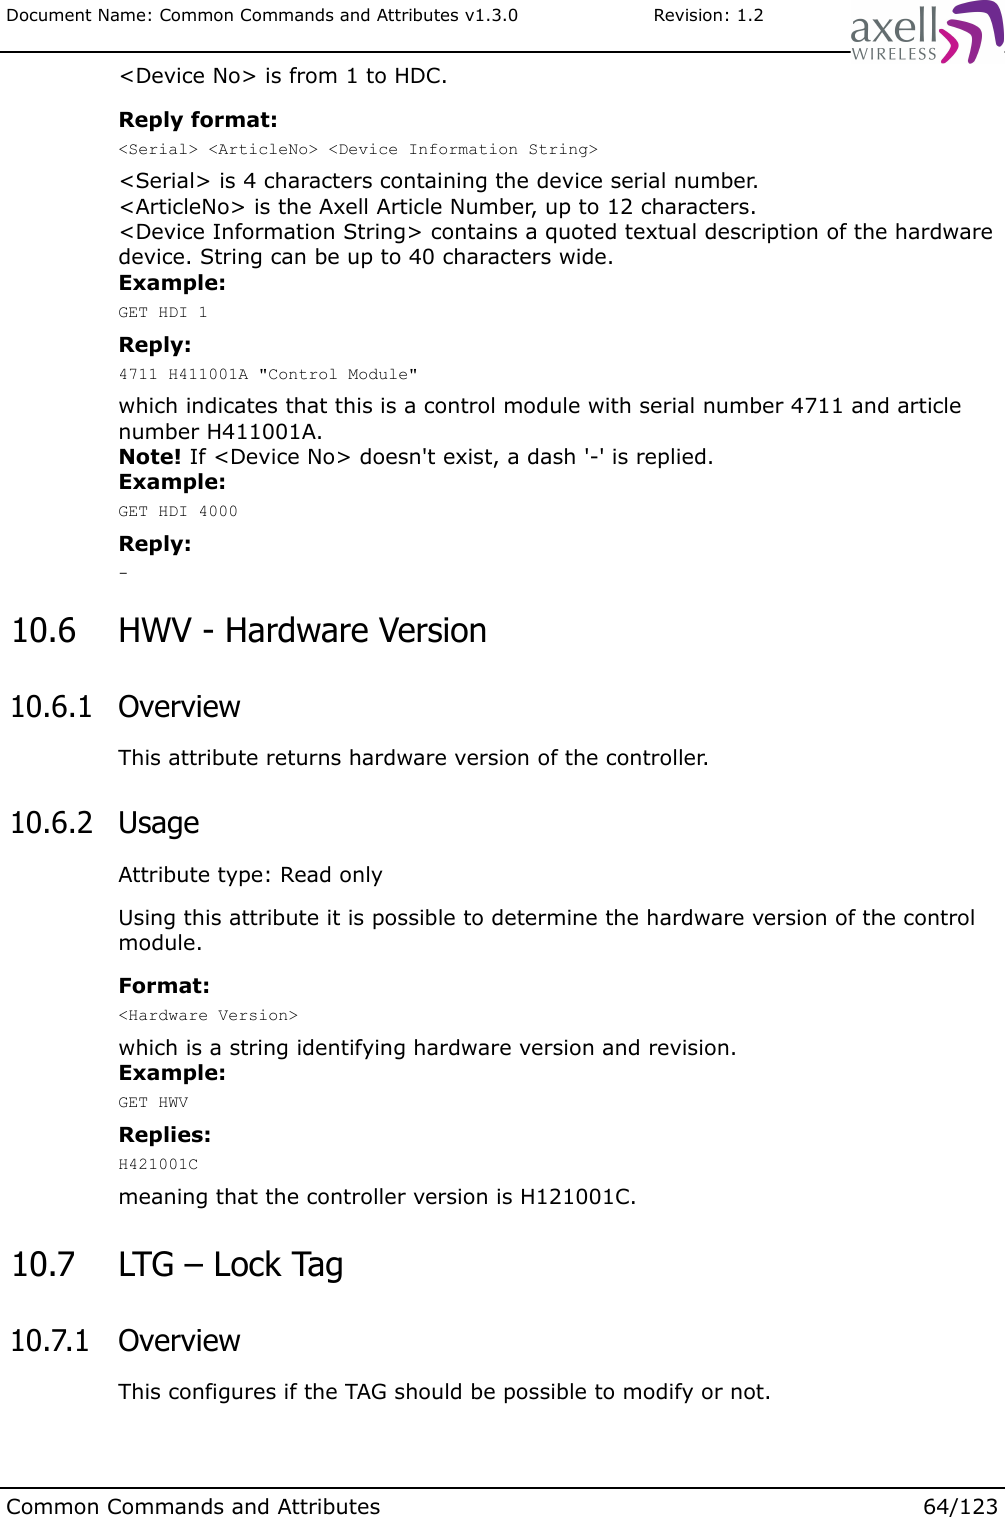 Document Name: Common Commands and Attributes v1.3.0                       Revision: 1.2&lt;Device No&gt; is from 1 to HDC.Reply format:&lt;Serial&gt; &lt;ArticleNo&gt; &lt;Device Information String&gt;&lt;Serial&gt; is 4 characters containing the device serial number. &lt;ArticleNo&gt; is the Axell Article Number, up to 12 characters.&lt;Device Information String&gt; contains a quoted textual description of the hardware device. String can be up to 40 characters wide. Example:GET HDI 1Reply:4711 H411001A &quot;Control Module&quot;which indicates that this is a control module with serial number 4711 and article number H411001A.Note! If &lt;Device No&gt; doesn&apos;t exist, a dash &apos;-&apos; is replied.Example:GET HDI 4000Reply:- 10.6  HWV - Hardware Version 10.6.1  OverviewThis attribute returns hardware version of the controller. 10.6.2  UsageAttribute type: Read onlyUsing this attribute it is possible to determine the hardware version of the control module.Format:&lt;Hardware Version&gt;which is a string identifying hardware version and revision.Example:GET HWVReplies:H421001Cmeaning that the controller version is H121001C. 10.7  LTG – Lock Tag 10.7.1  OverviewThis configures if the TAG should be possible to modify or not.Common Commands and Attributes 64/123